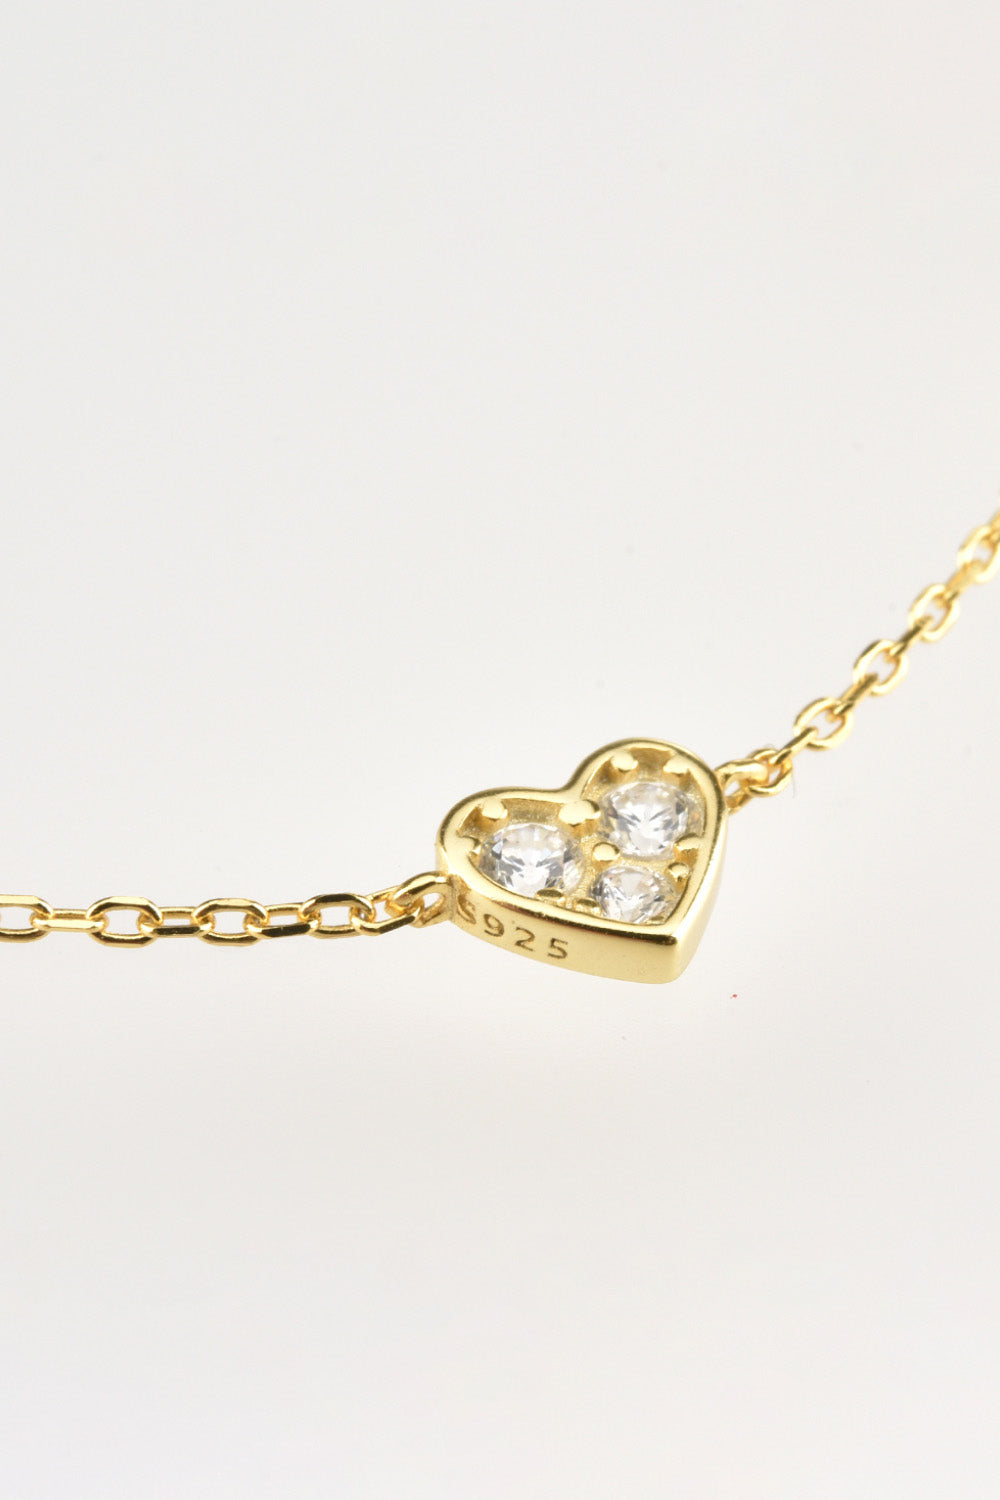 Wear our heart necklace as a symbol of love and affection, a perfect gift for someone special.